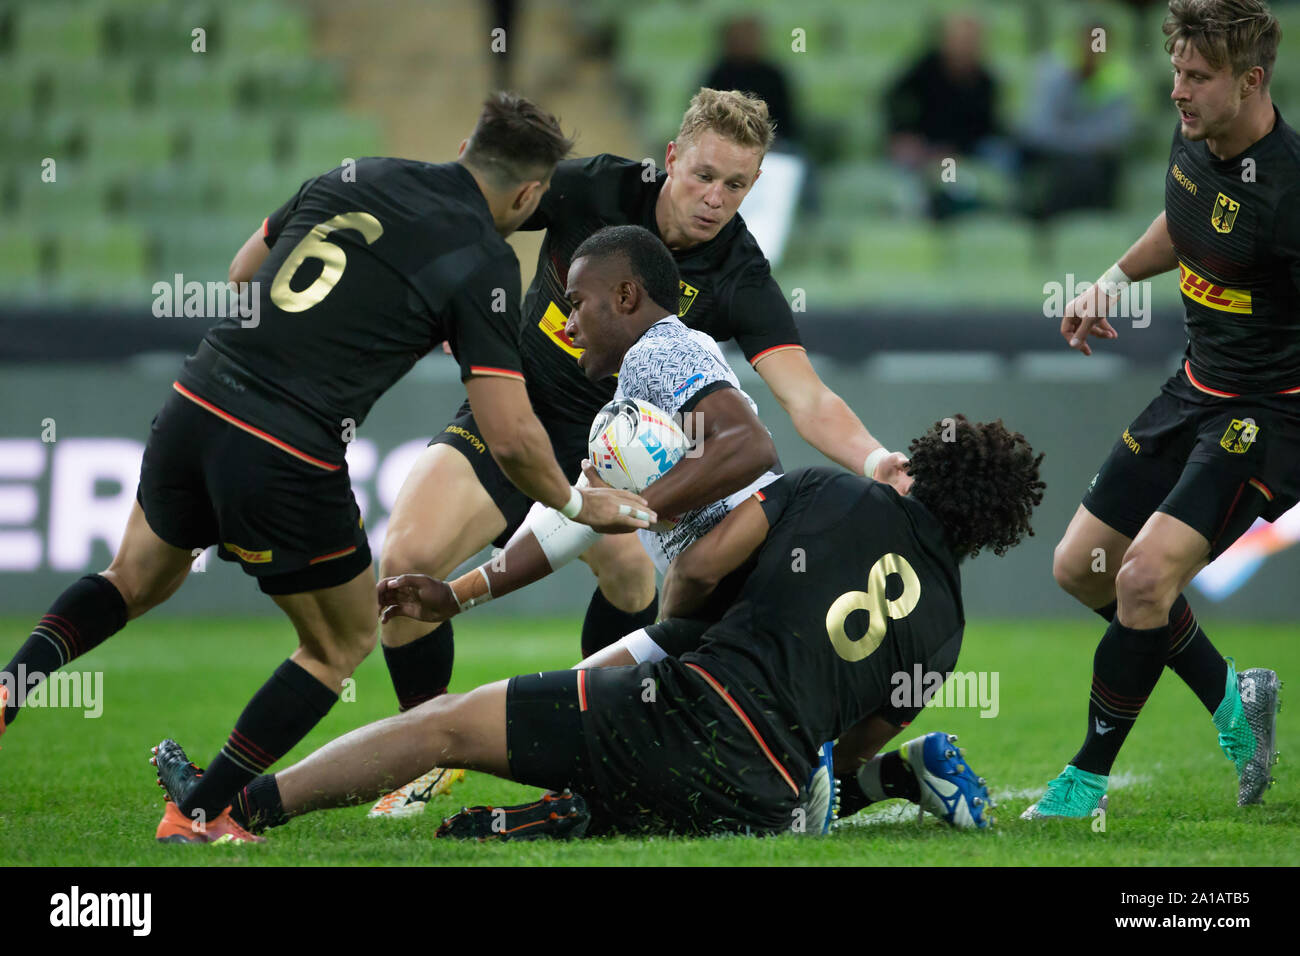 Munich, Germany. 21st Sep, 2019. Oktoberfest Sevens Rugby Tournament in Munich on 21 and 22 September 2019. Group match between Germany and Fiji. Tevita Mociu (Fiji, 8) is held by Ben Ellermann (Germany, 8), Fabian Heimpel (Germany, 6) on the left and Tim Lichtenberg (Germany, 12) in the background. Right Phil Szczesny (Germany, 5). Credit: Jürgen Kessler/dpa/Alamy Live News Stock Photo